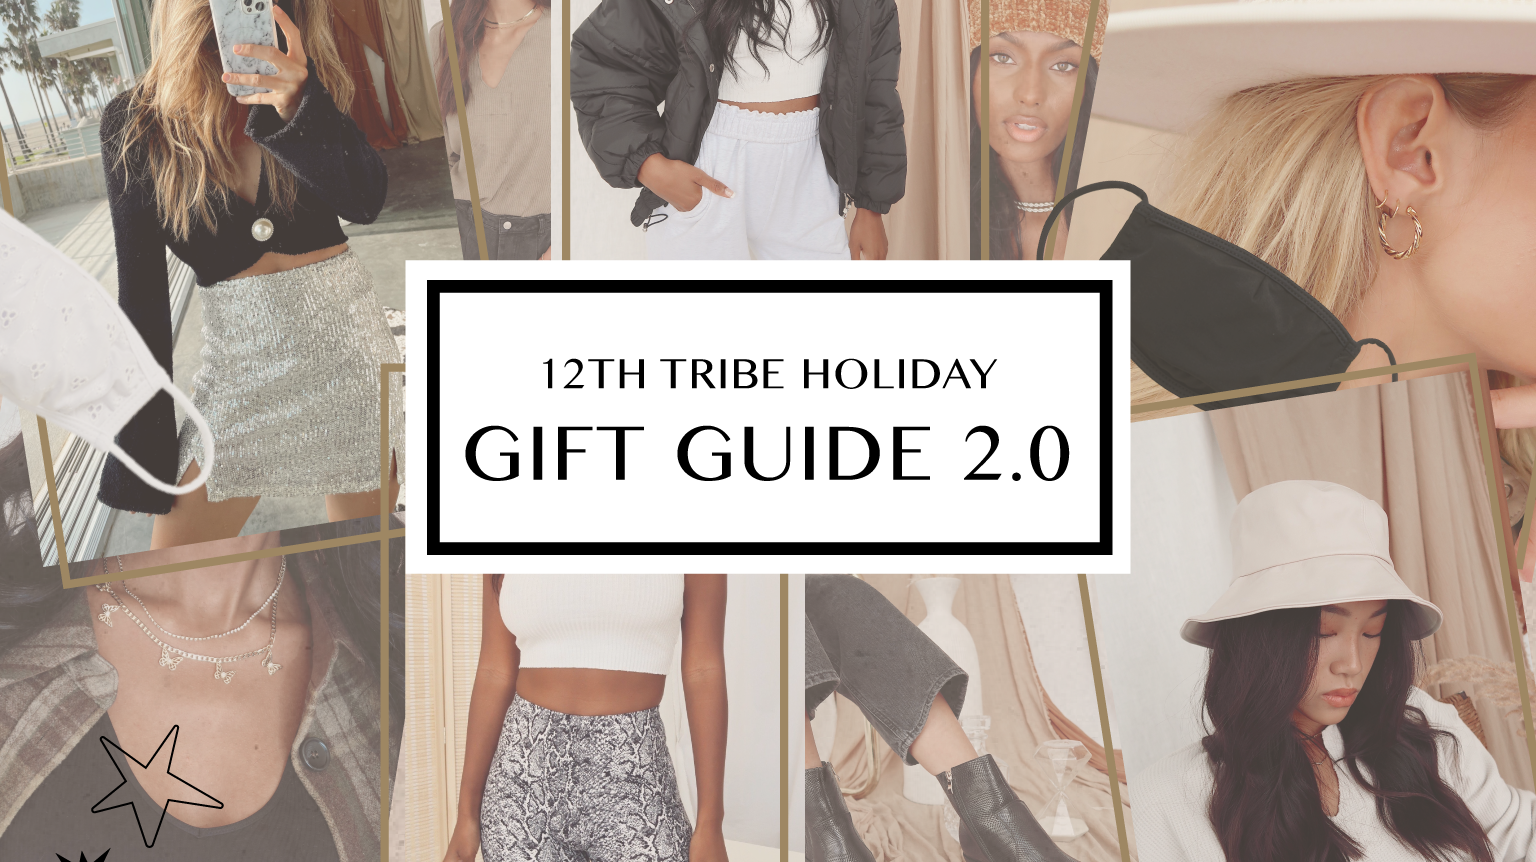 12th Tribe Holiday Gift Guide 2.0